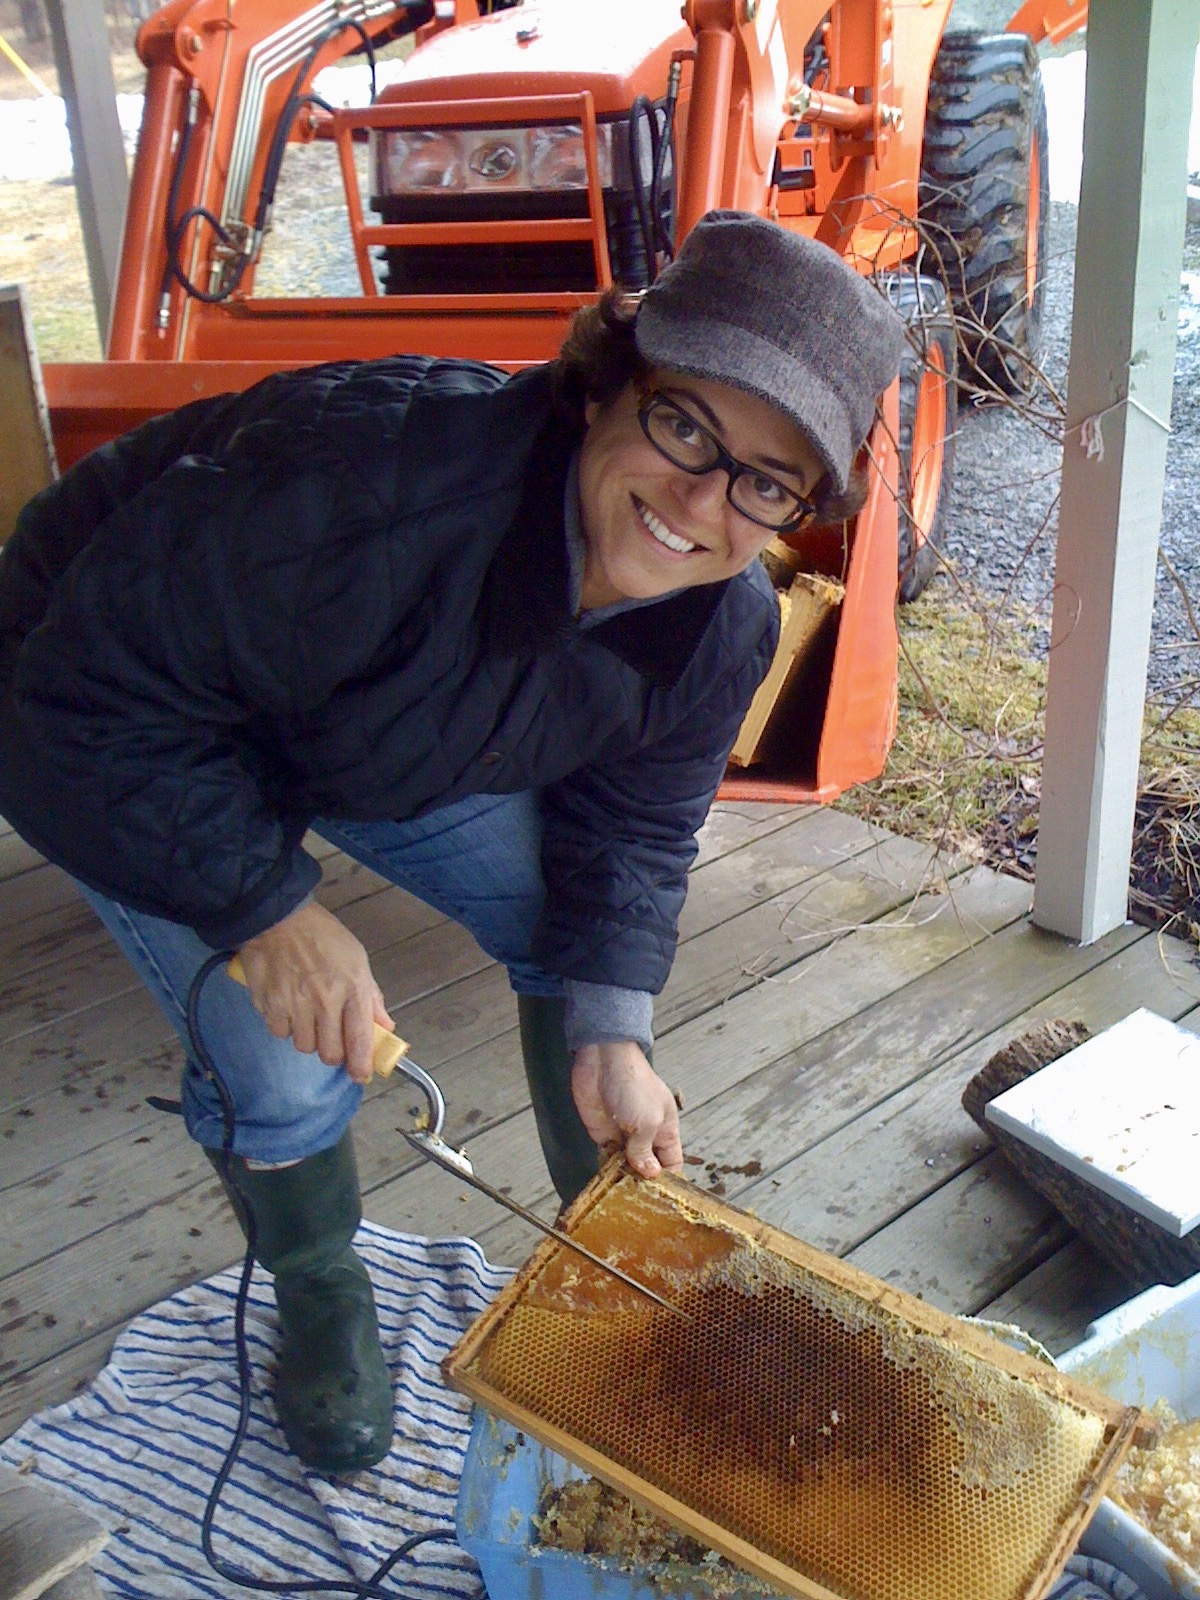 Local honey is powering multiple business ventures for Claire.